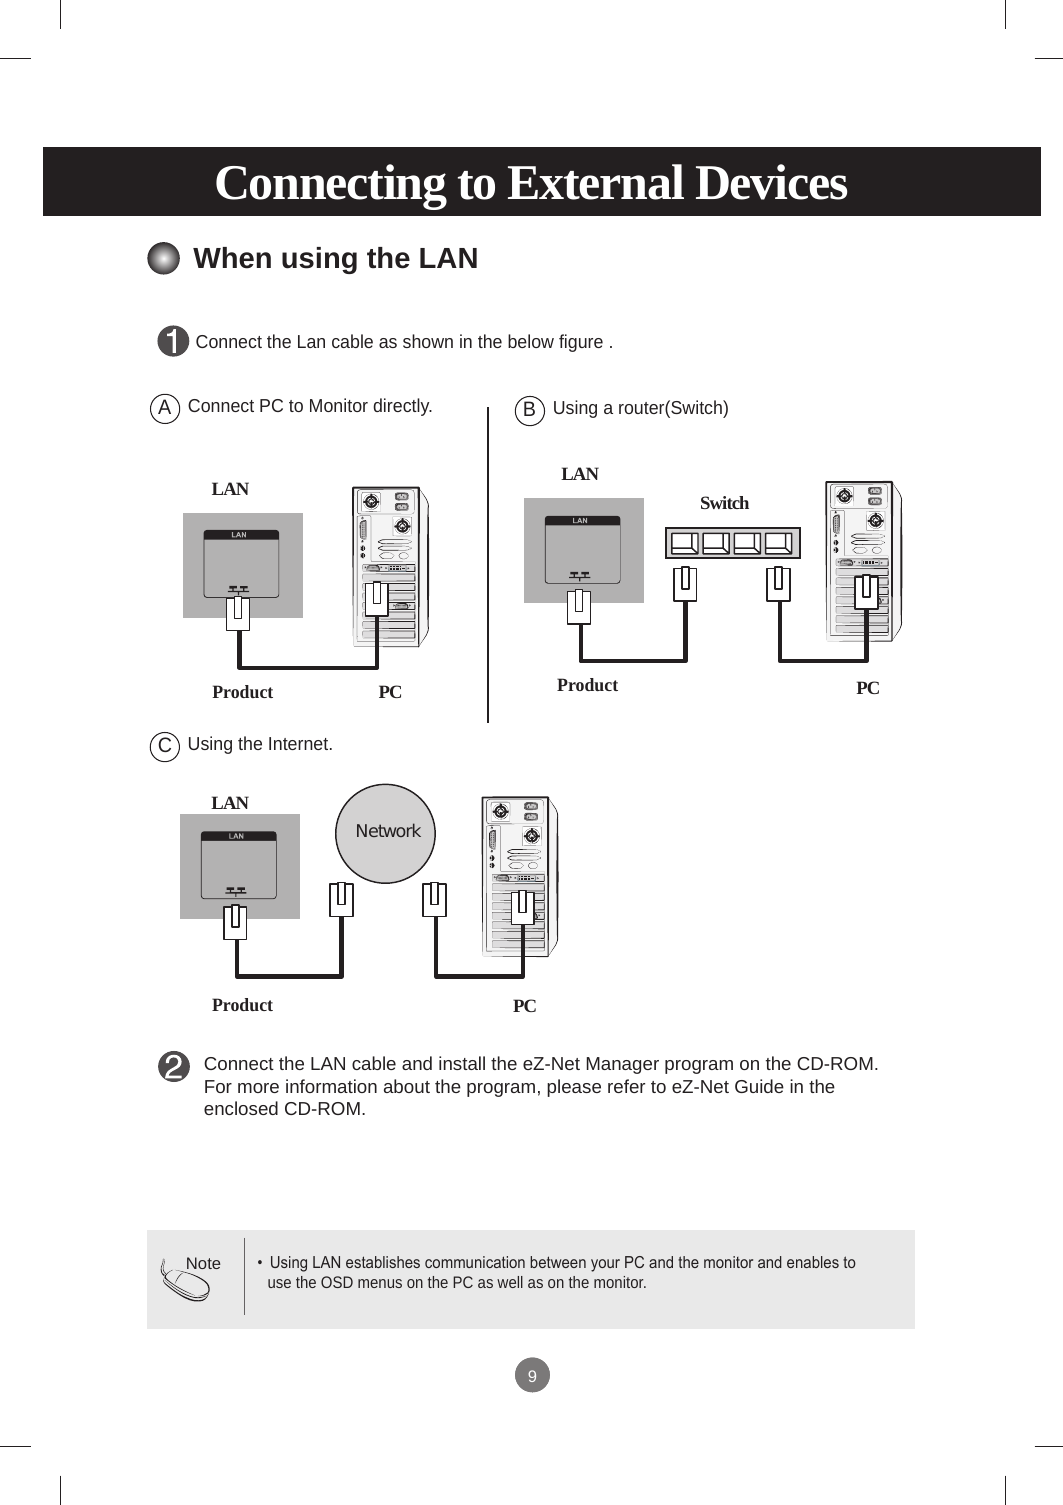 99Connecting to External DevicesWhen using the LAN•  Using LAN establishes communication between your PC and the monitor and enables to use the OSD menus on the PC as well as on the monitor.NoteConnect the Lan cable as shown in the below figure . Connect the LAN cable and install the eZ-Net Manager program on the CD-ROM.For more information about the program, please refer to eZ-Net Guide in the enclosed CD-ROM.Connect PC to Monitor directly.AUsing a router(Switch)BPCProductNetworkNetworkProductLANPCLANSwitchUsing the Internet.CPCProductNetworkLAN